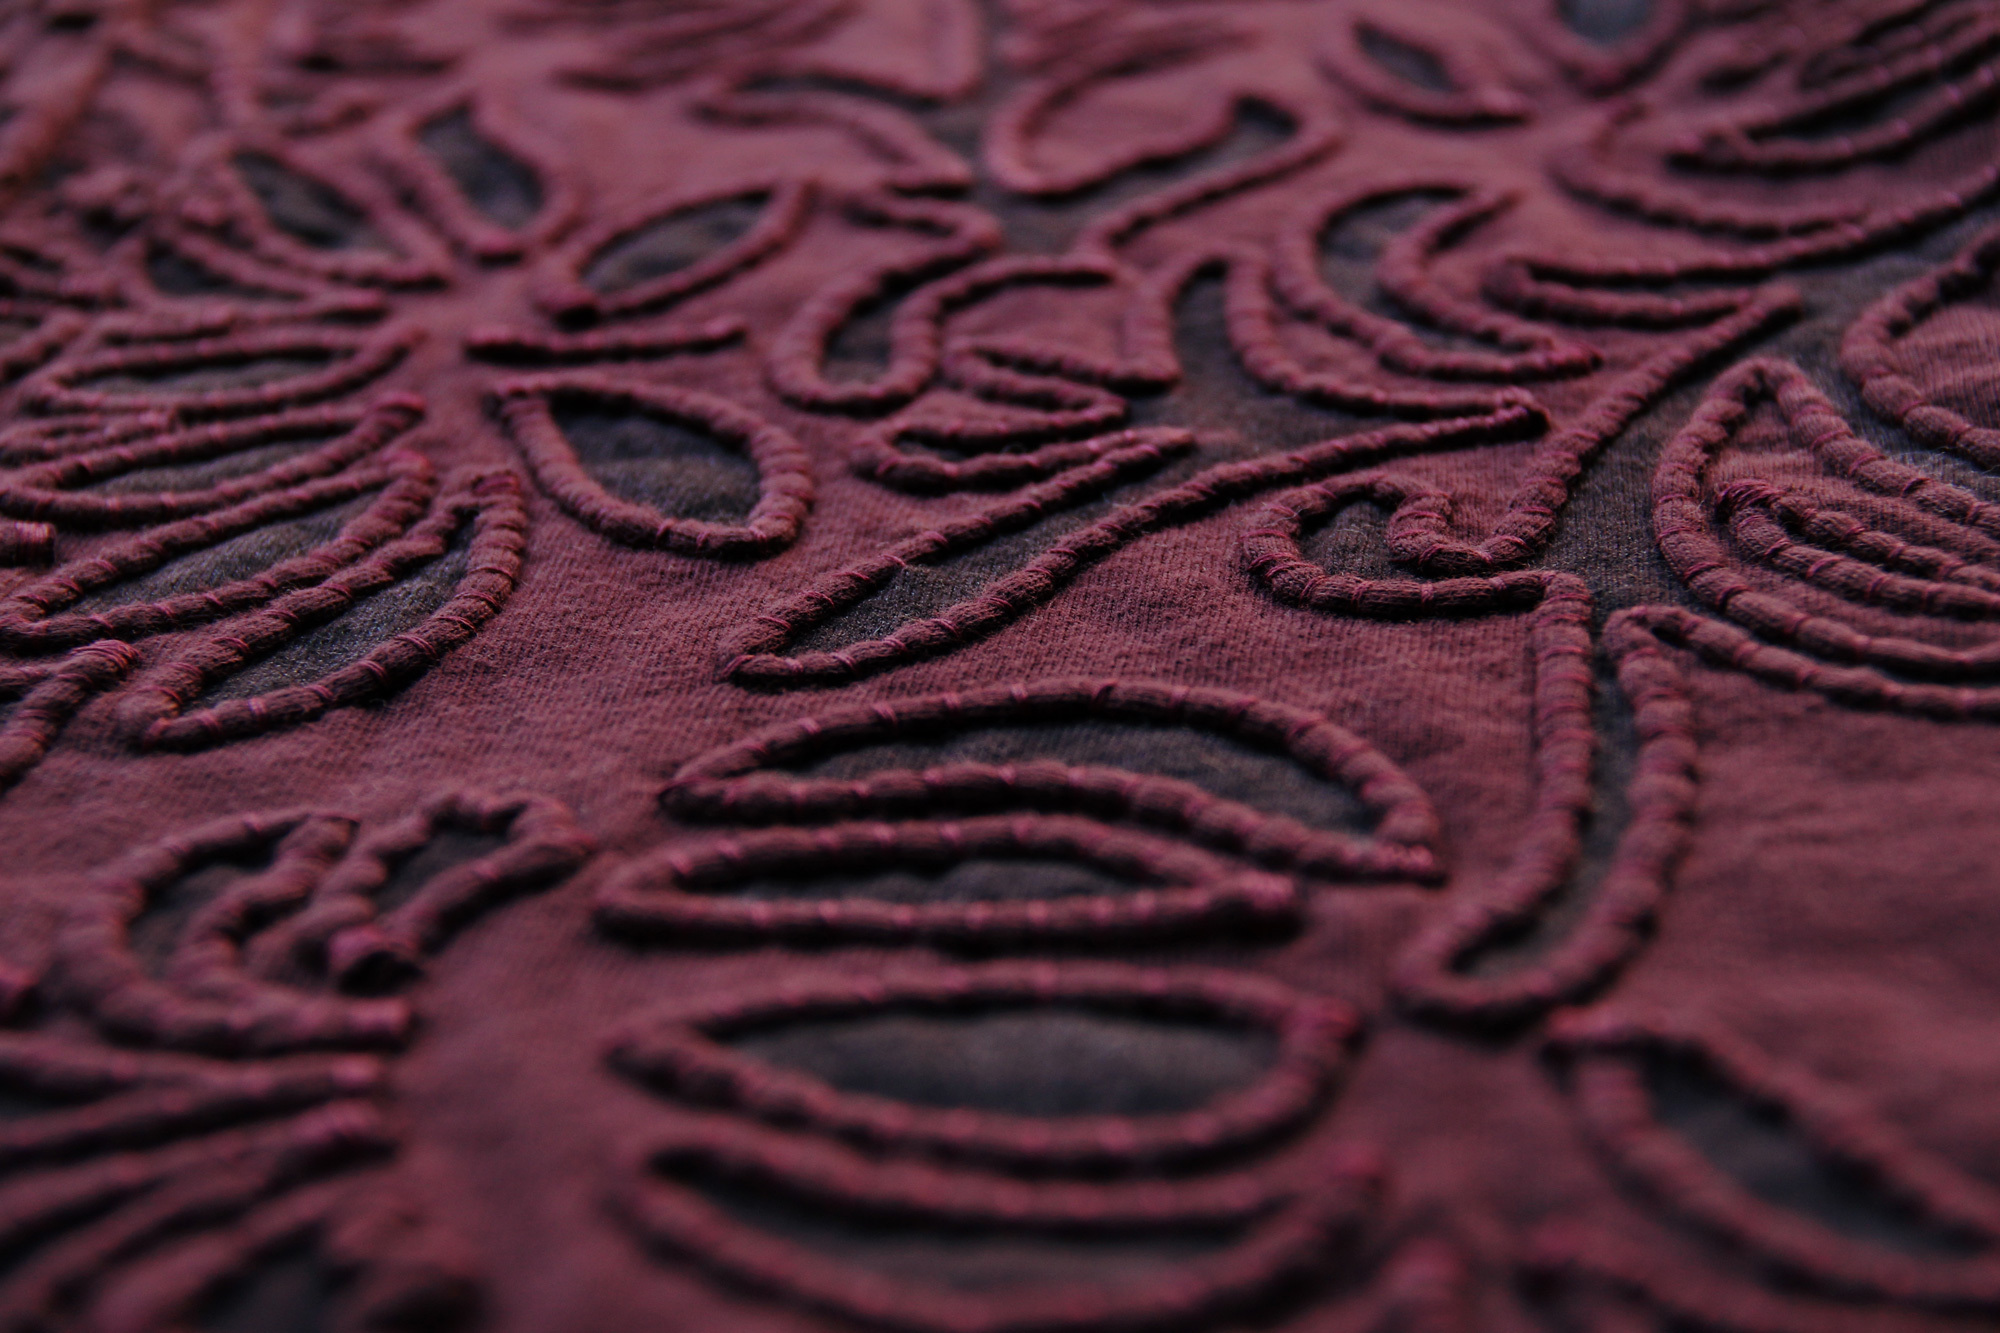 Fabric swatch showing appliqué couching around a floral stencil on plum-colored fabric.